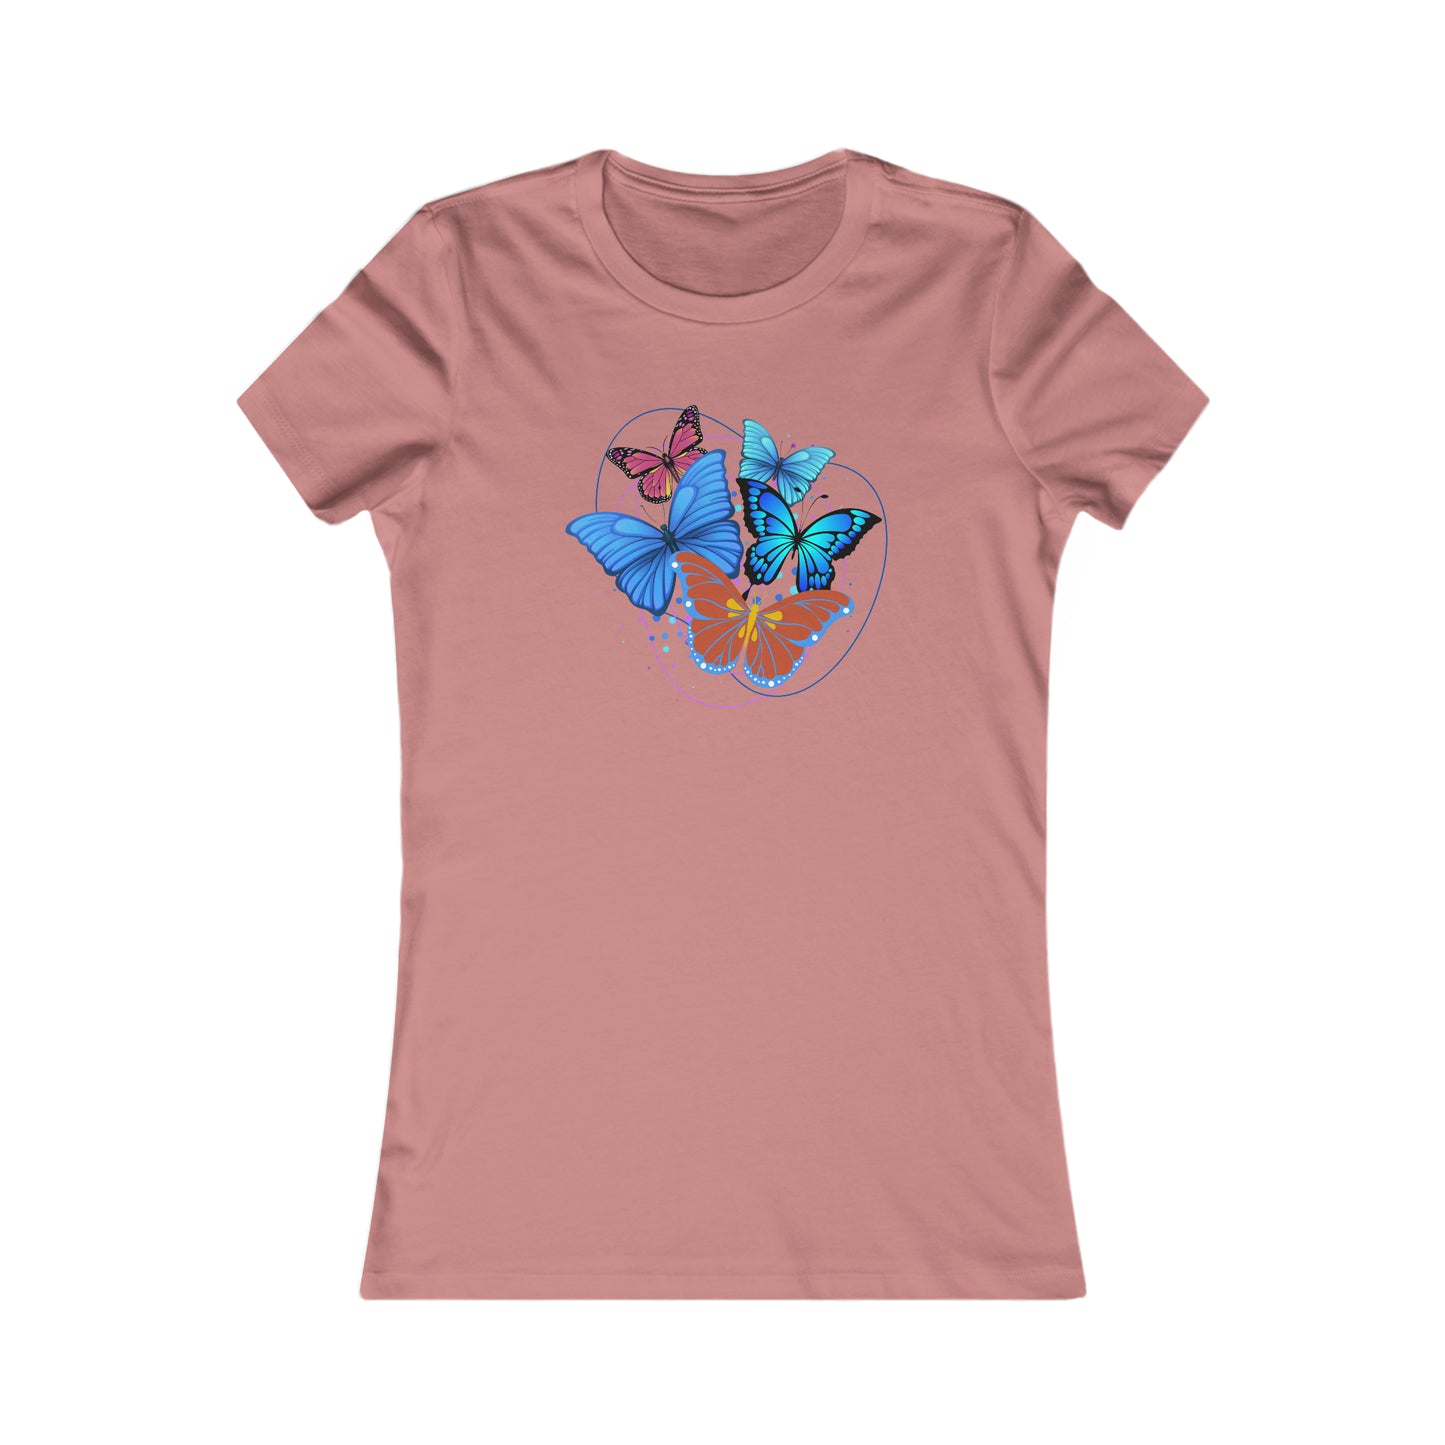 Butterflies rule on this wonderfully designed Women's Favorite Tee. Slim fit so please check the size table.